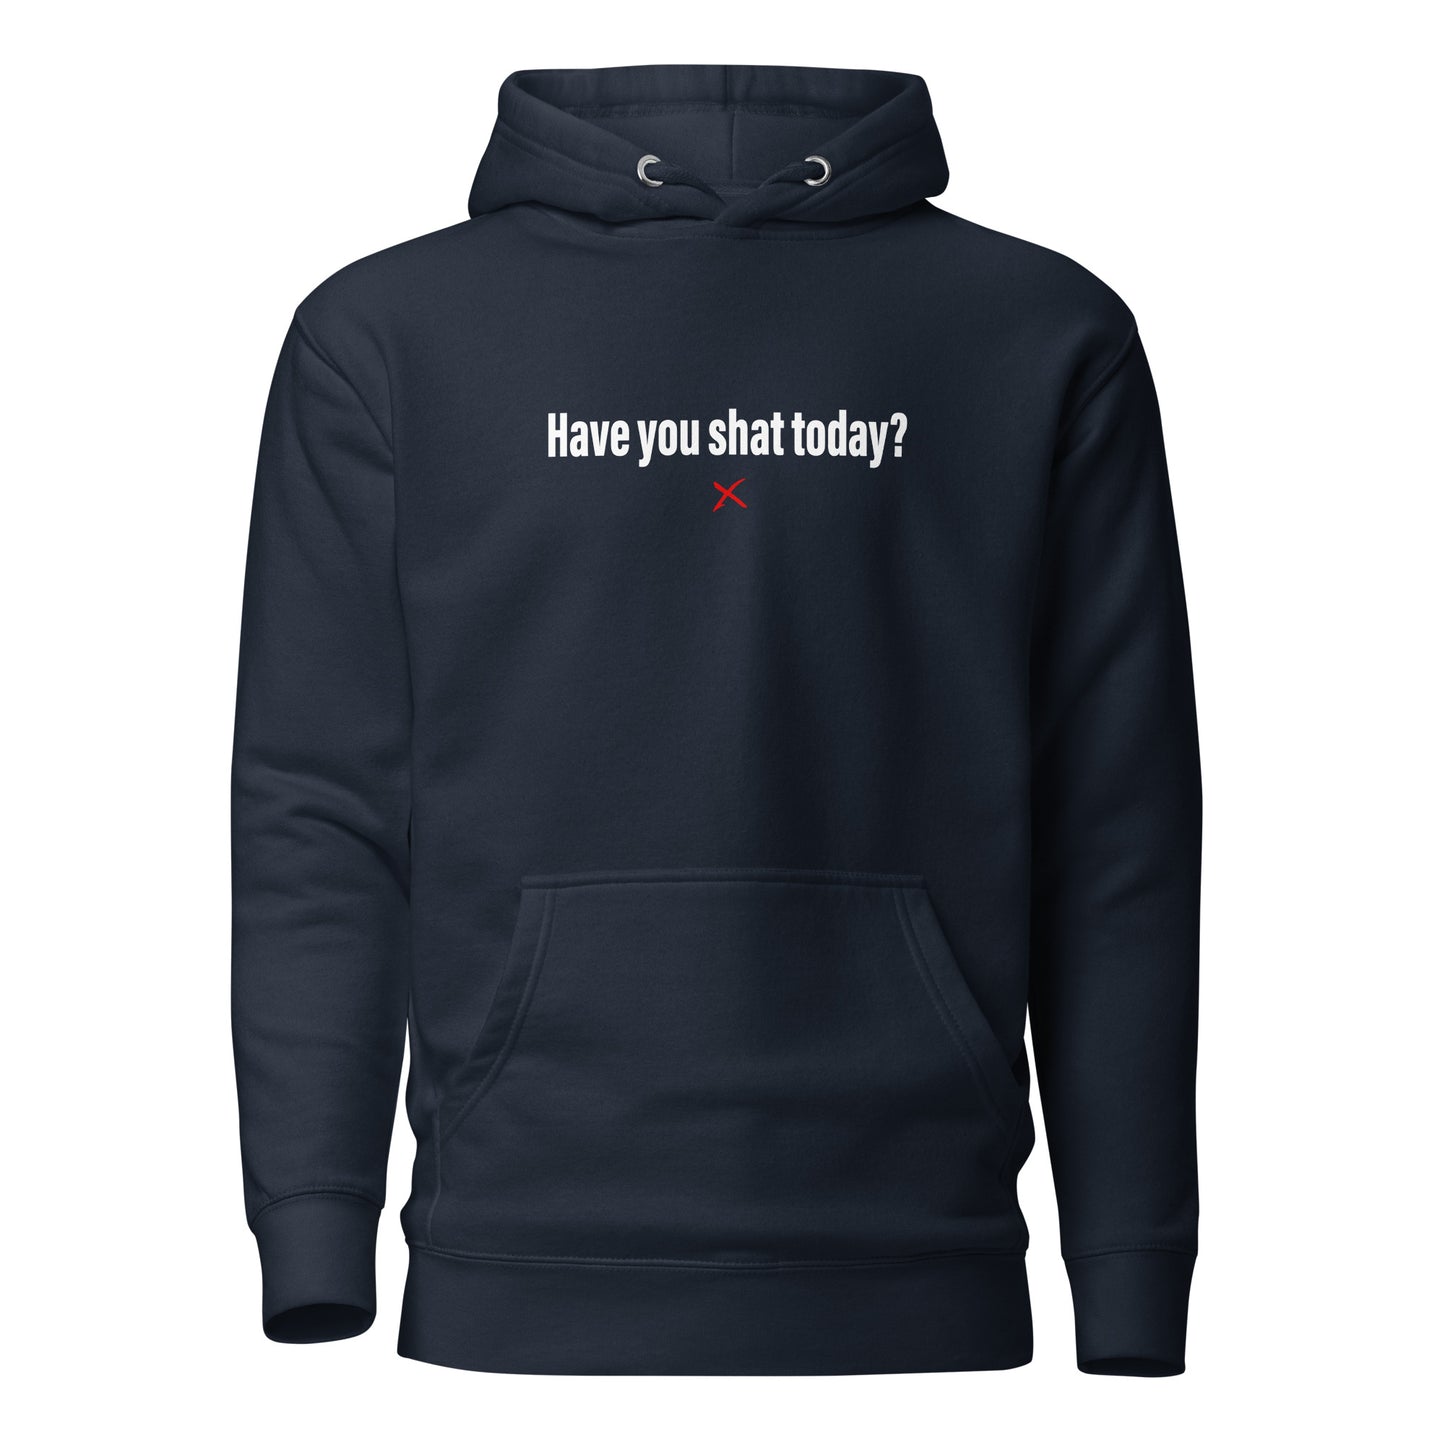 Have you shat today? - Hoodie